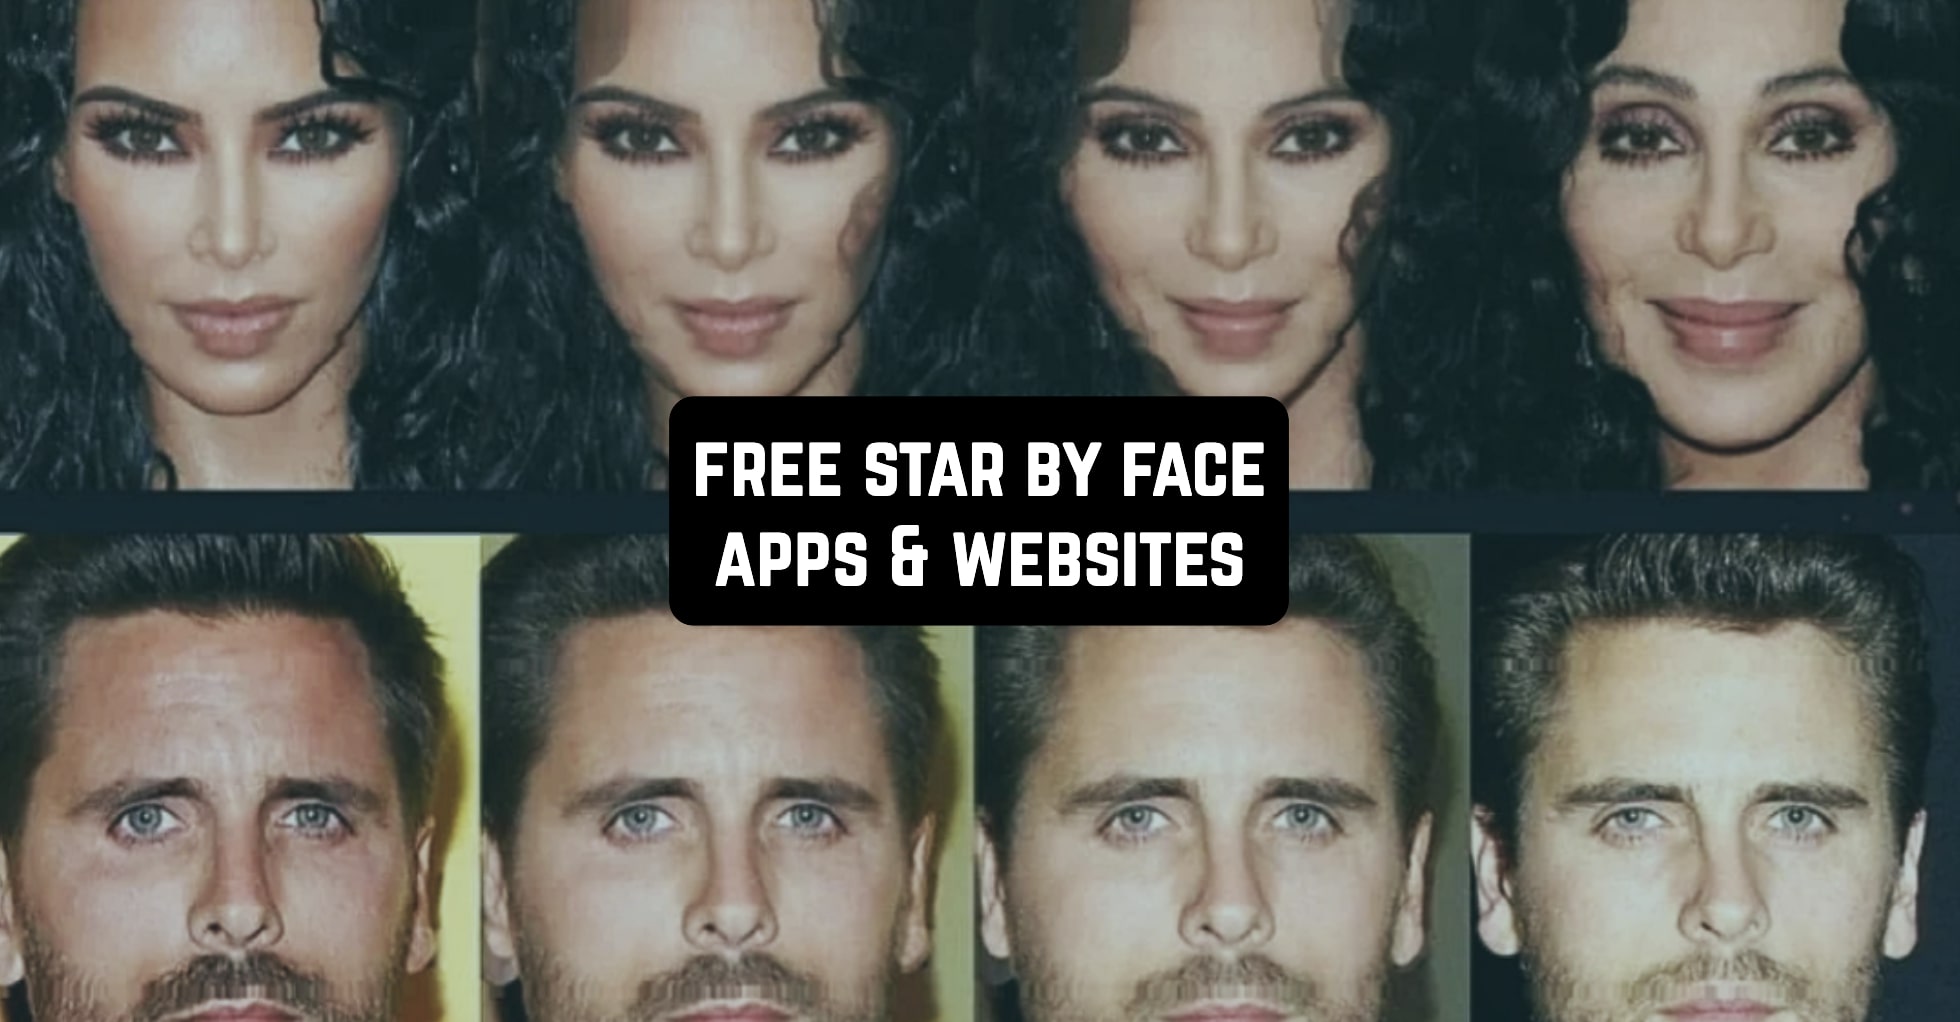 Free-Star-By-Face-Apps-Websites